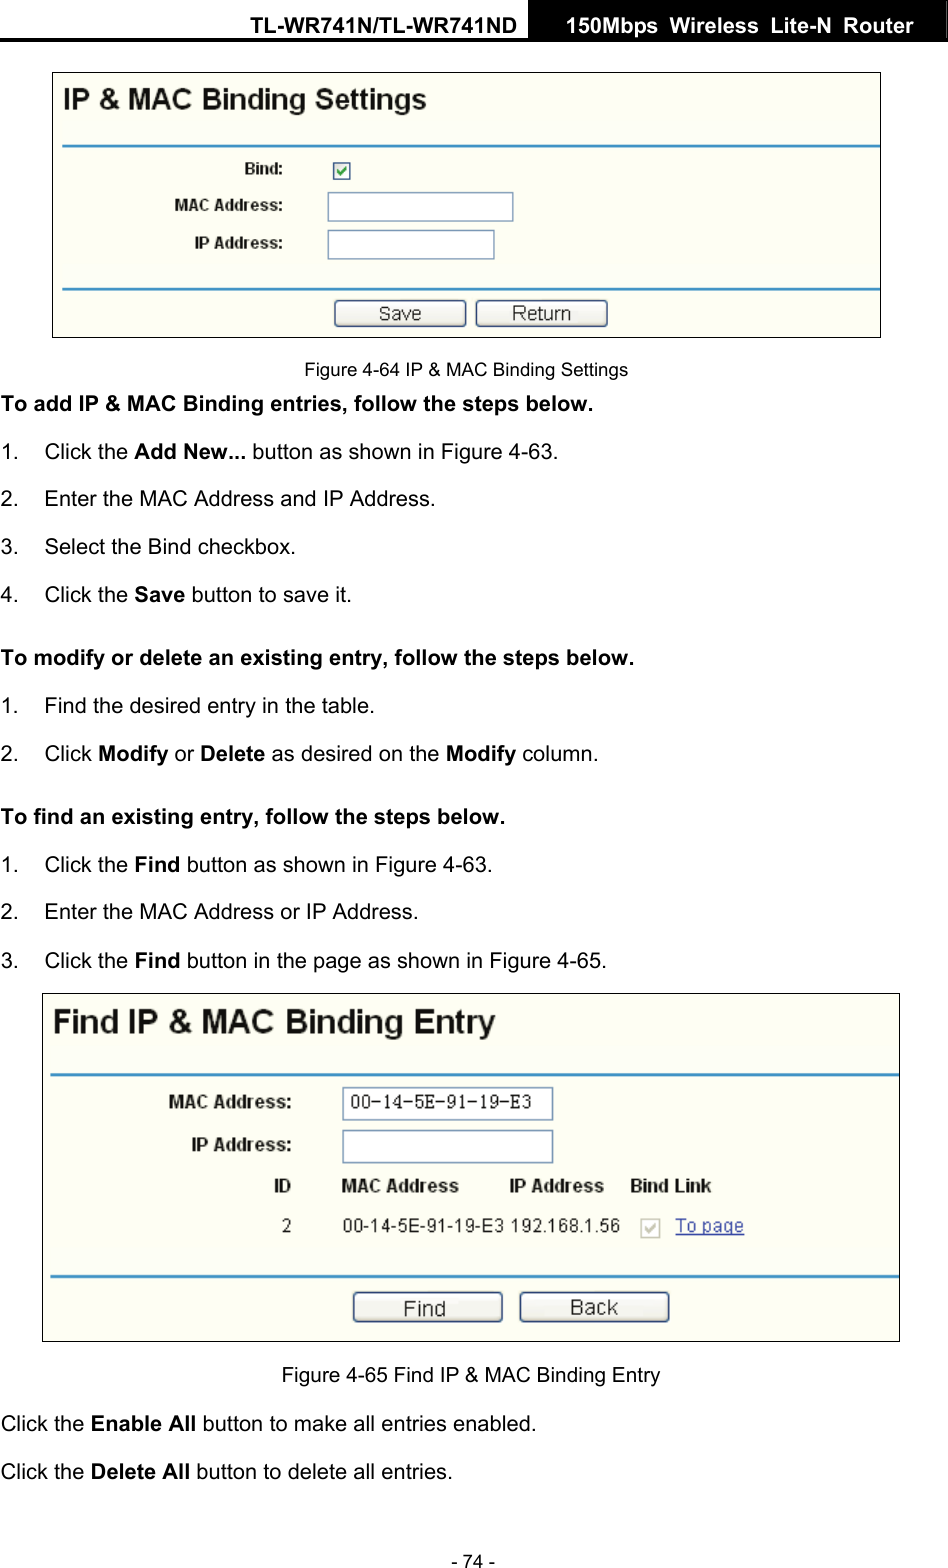 TL-WR741N/TL-WR741ND  150Mbps Wireless Lite-N Router   - 74 -  Figure 4-64 IP &amp; MAC Binding Settings To add IP &amp; MAC Binding entries, follow the steps below. 1. Click the Add New... button as shown in Figure 4-63.   2.  Enter the MAC Address and IP Address. 3.  Select the Bind checkbox.   4. Click the Save button to save it. To modify or delete an existing entry, follow the steps below. 1.  Find the desired entry in the table.   2. Click Modify or Delete as desired on the Modify column.   To find an existing entry, follow the steps below. 1. Click the Find button as shown in Figure 4-63. 2.  Enter the MAC Address or IP Address. 3. Click the Find button in the page as shown in Figure 4-65.  Figure 4-65 Find IP &amp; MAC Binding Entry Click the Enable All button to make all entries enabled. Click the Delete All button to delete all entries. 